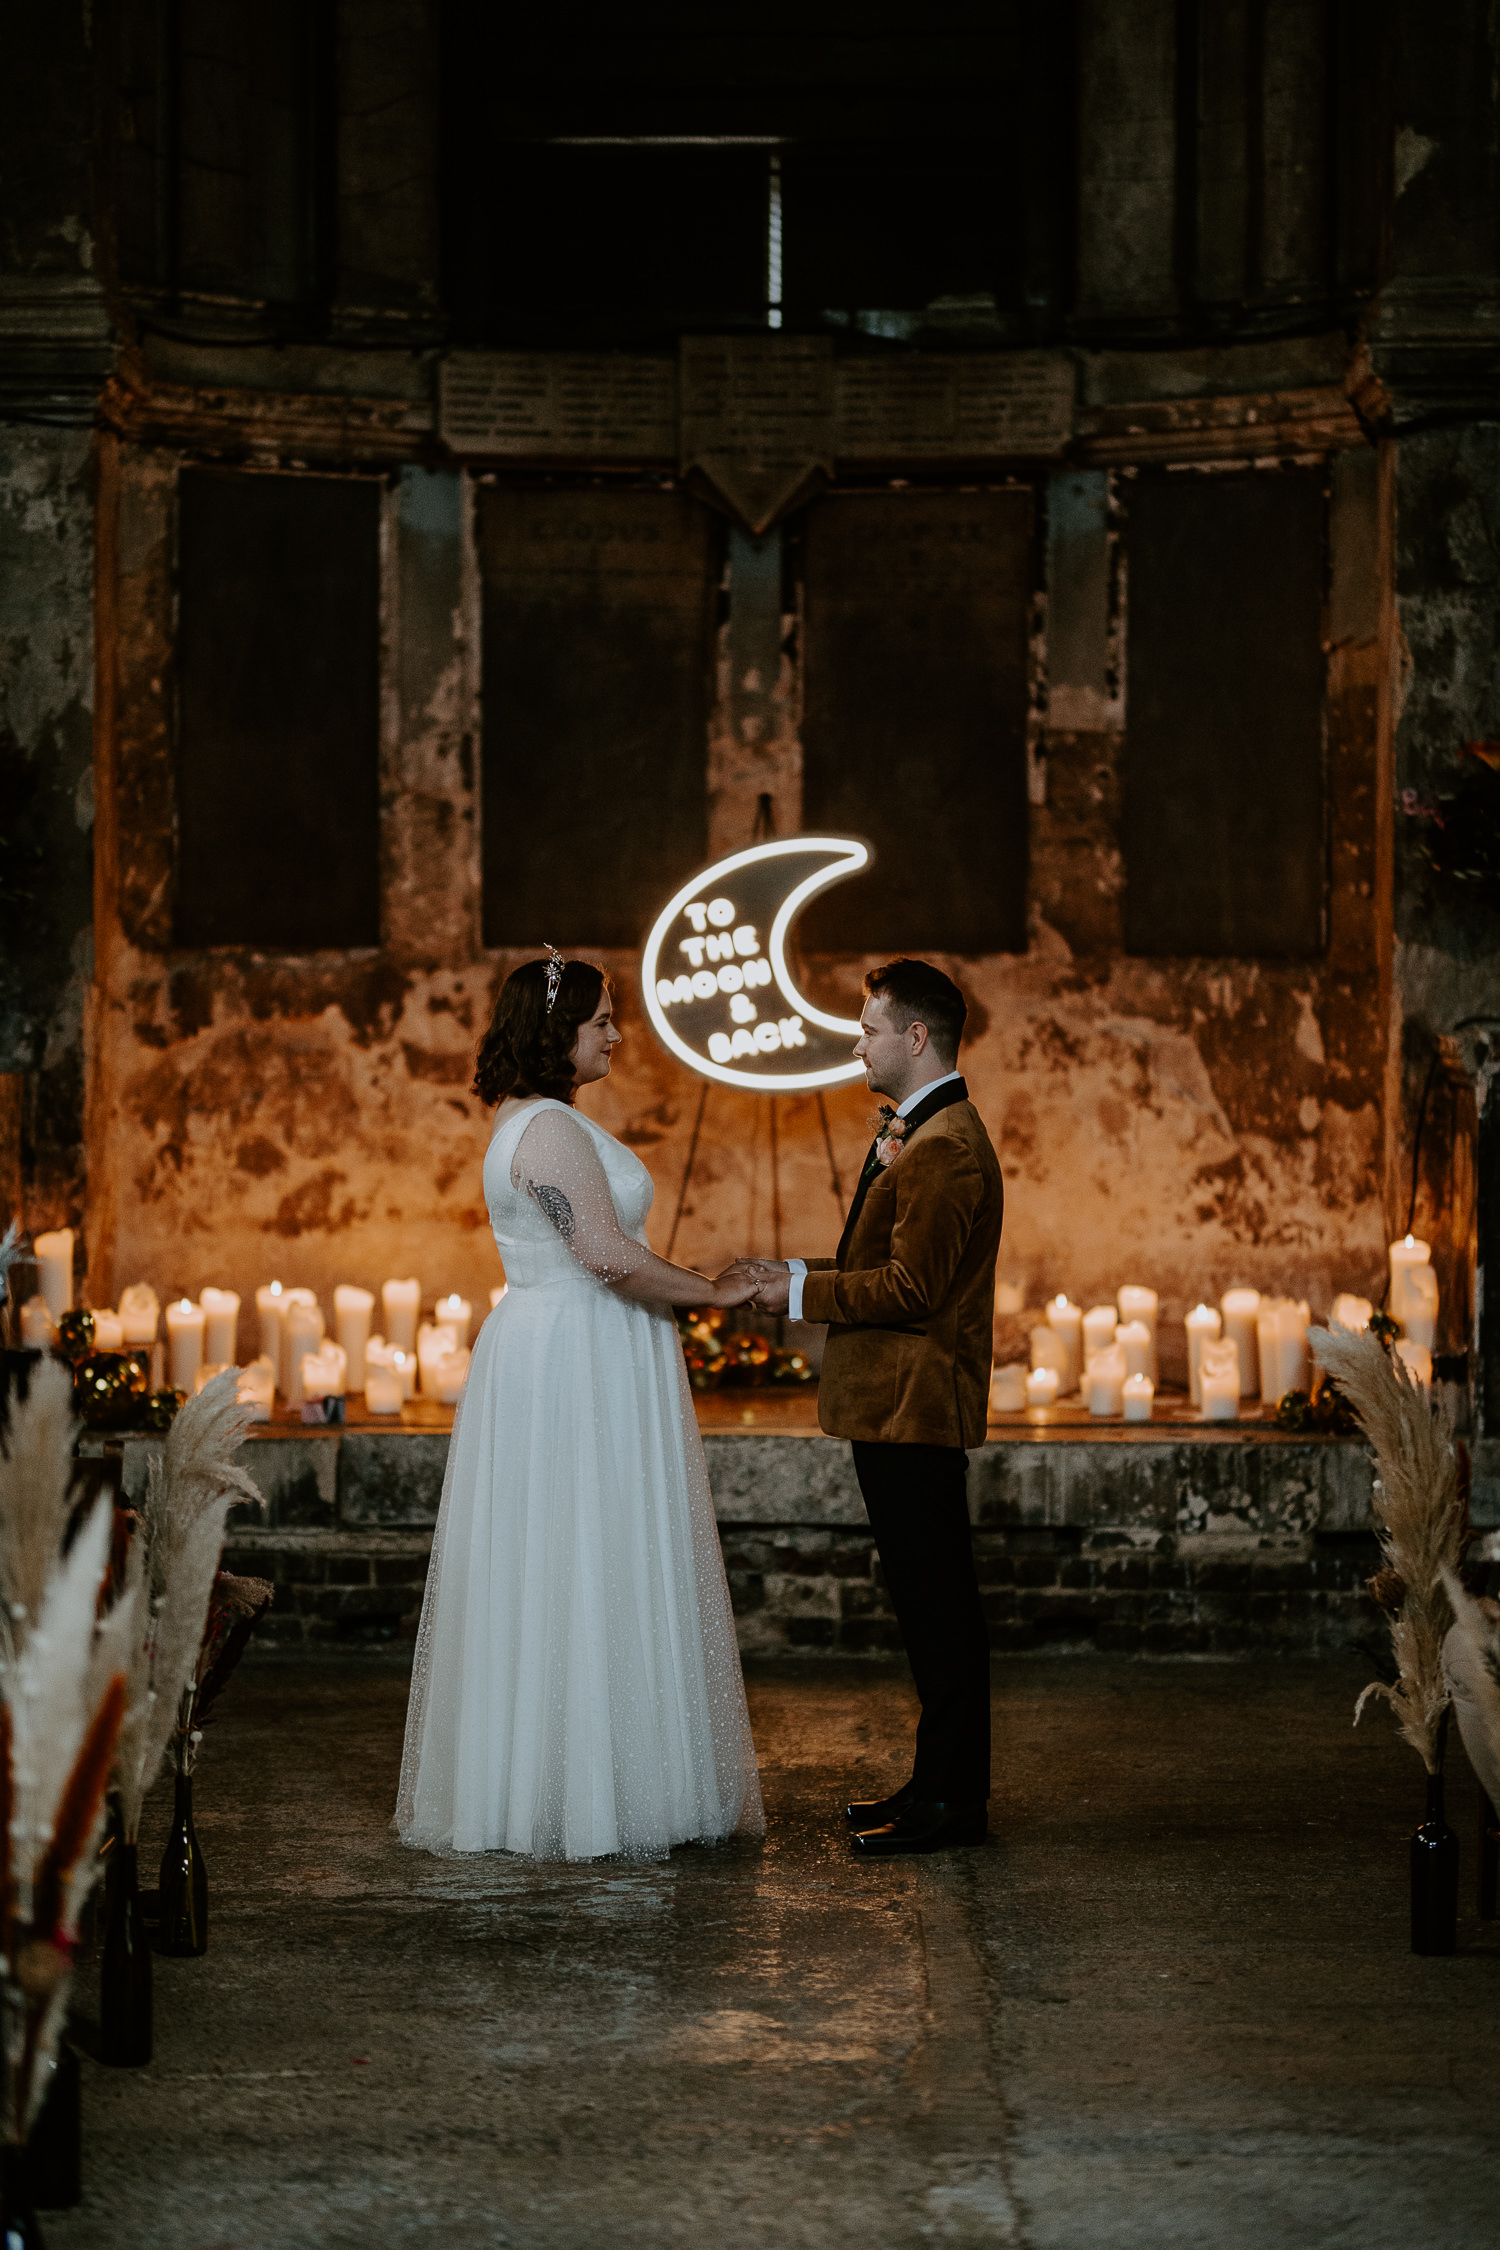 A couple get married at The Asylum Chapel in Peckham, London. The venue is untradtional and has some awesome features like the exposed brick, huge windows letting in all the natural light and the fact it is a black canvas venue so yo can really put your own style into it.